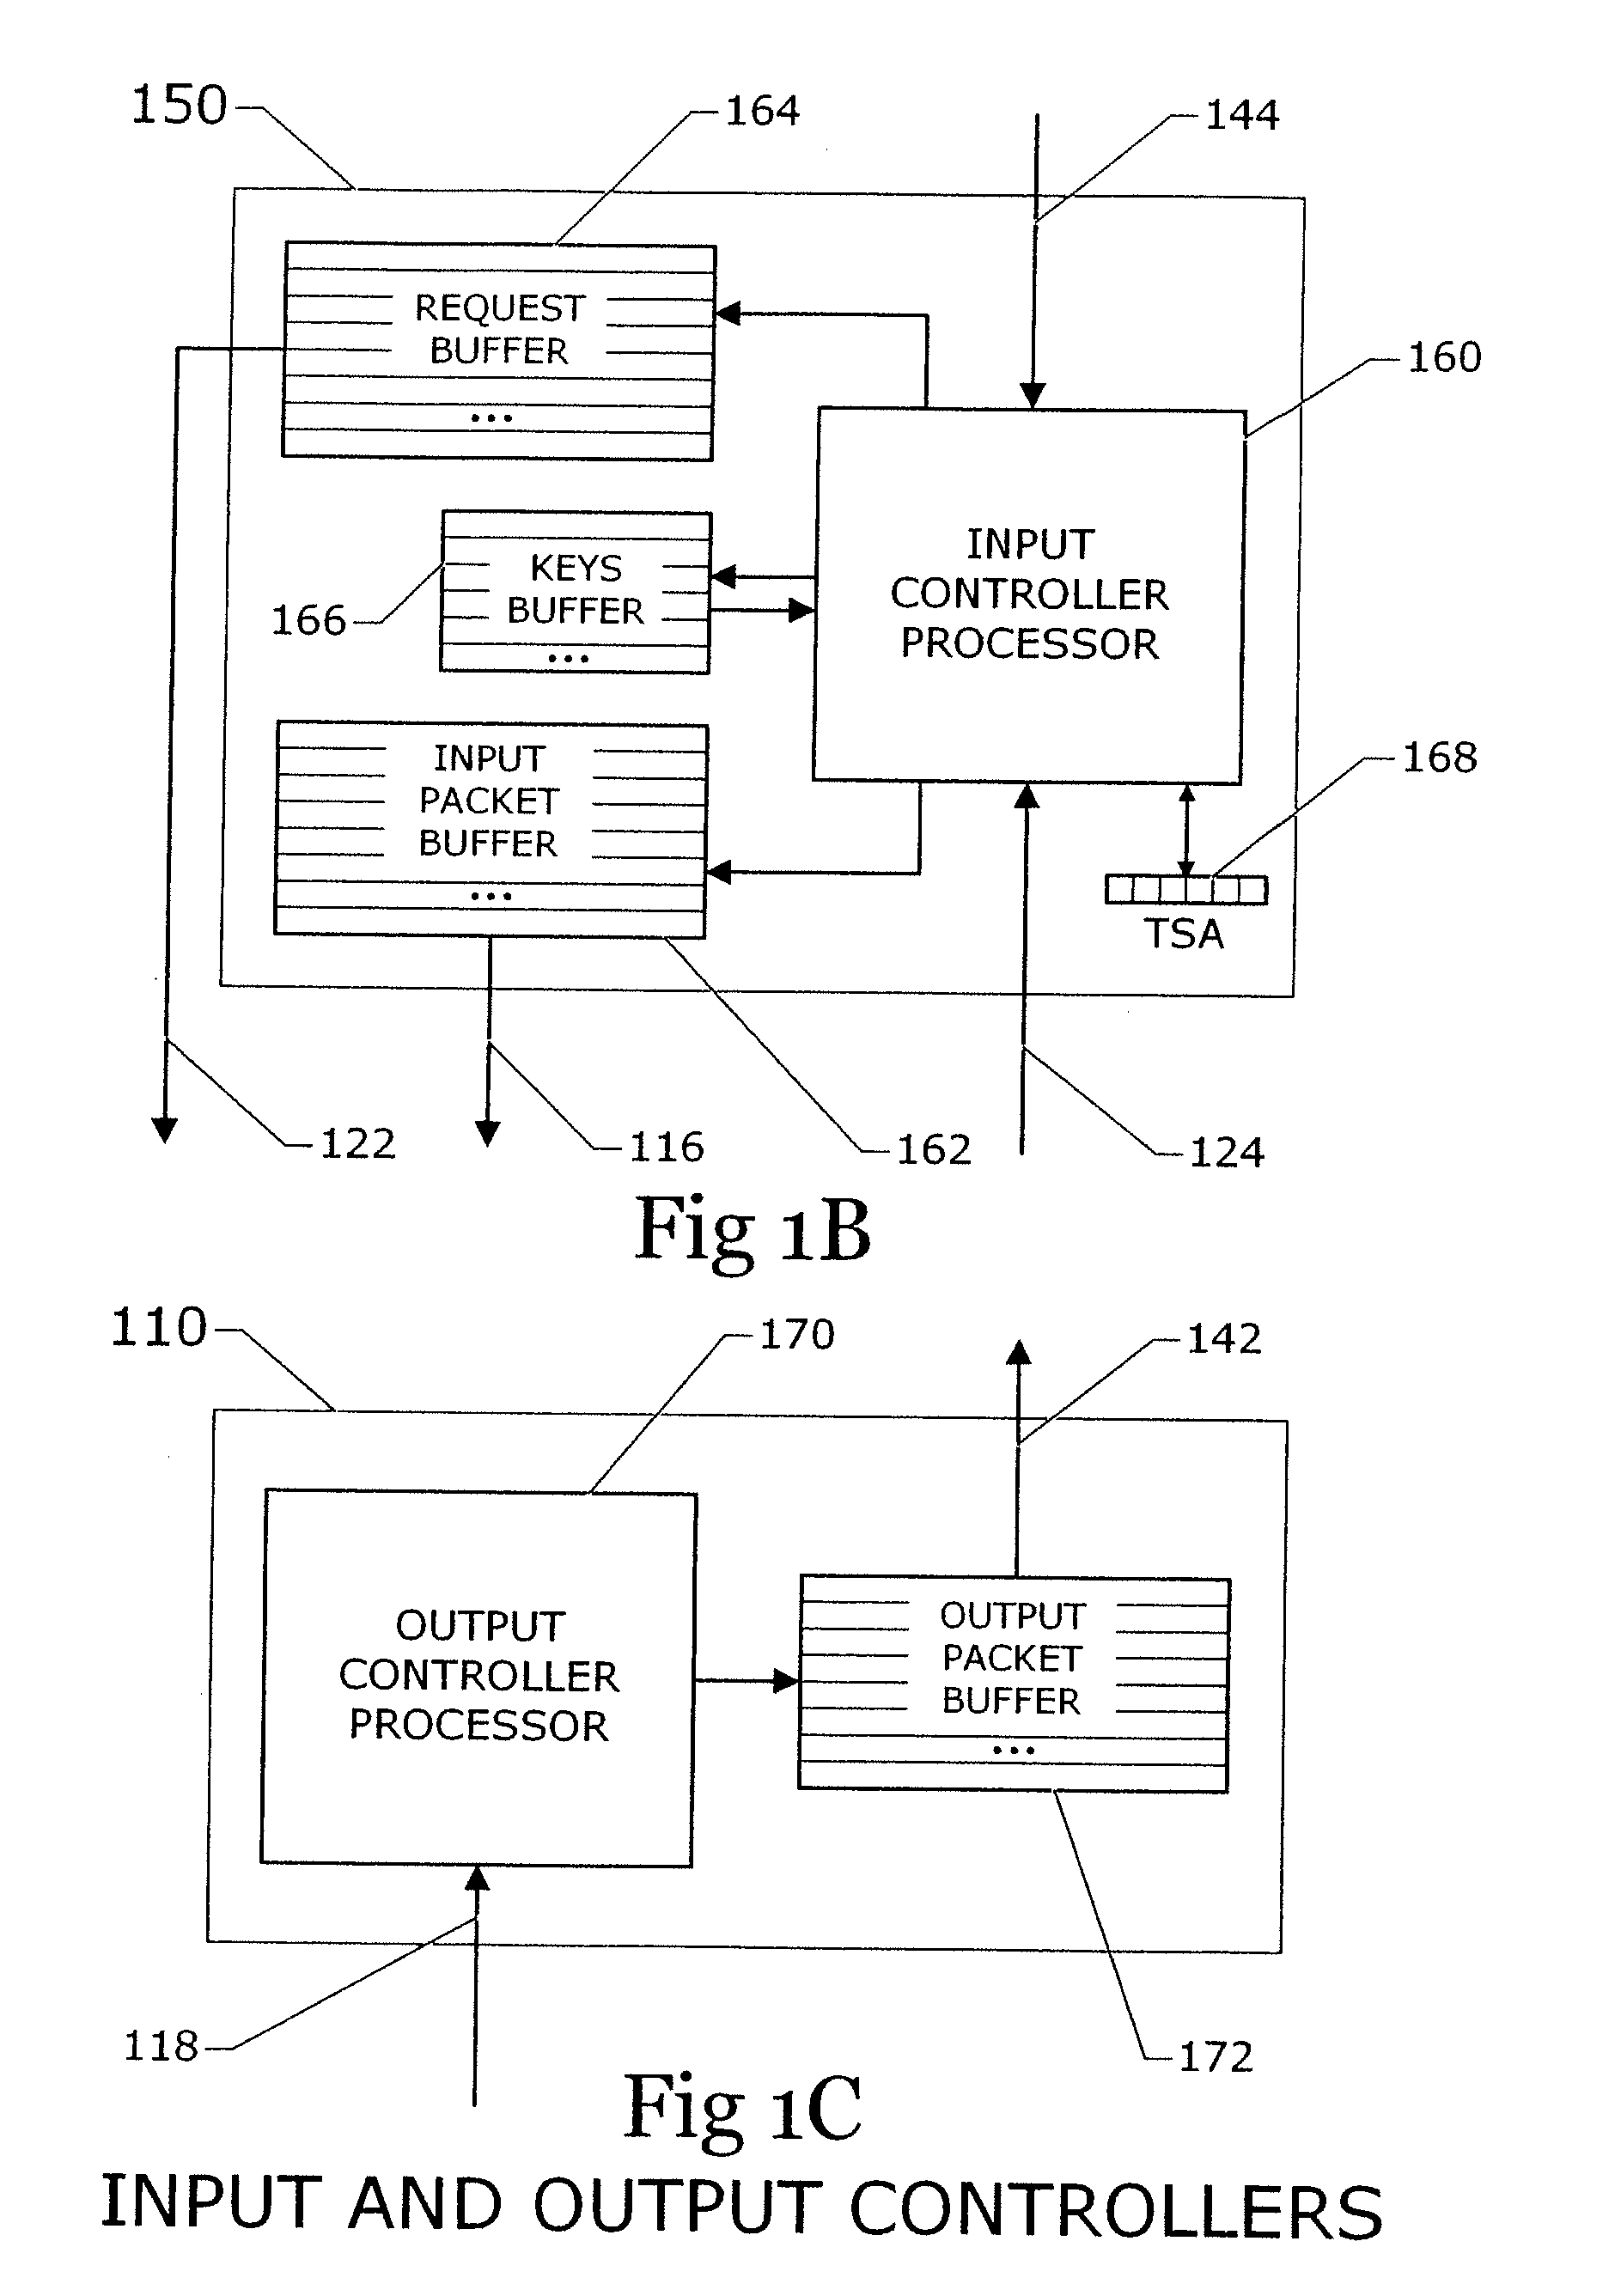 Means and apparatus for a scalable congestion free switching system with intelligent control